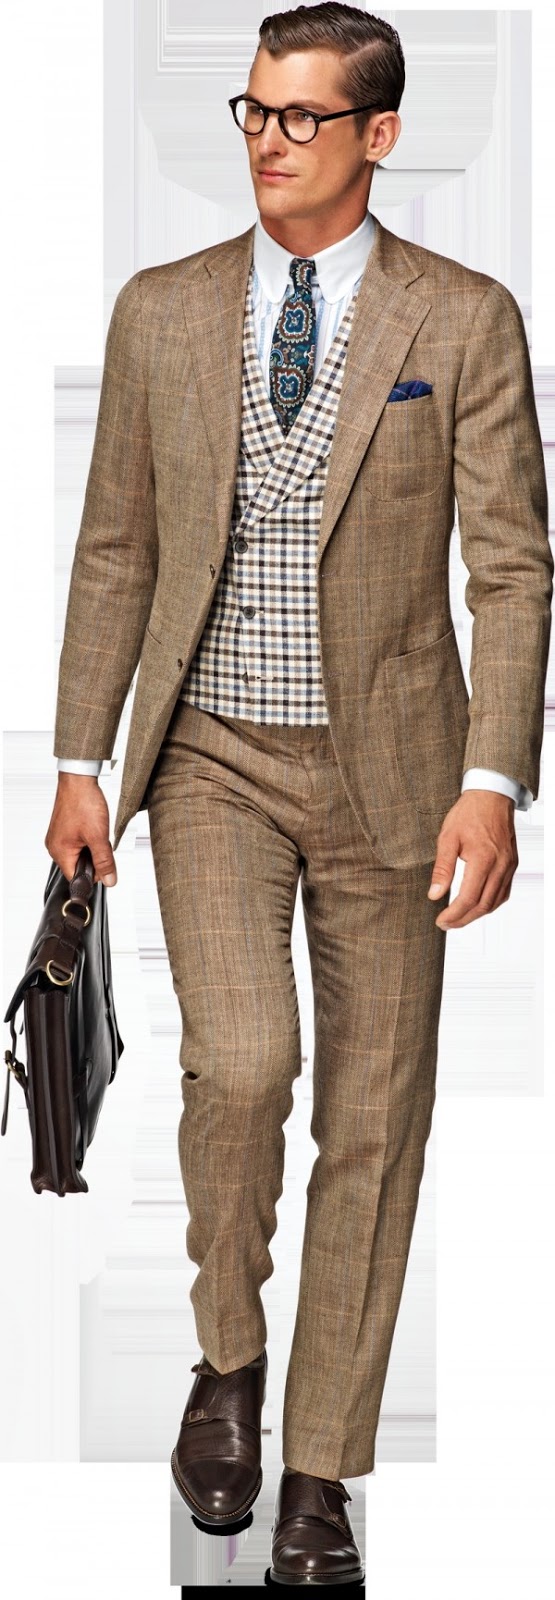 Latest Fashion And Styles Around The World 2015 Mens Suits By Suitsupply